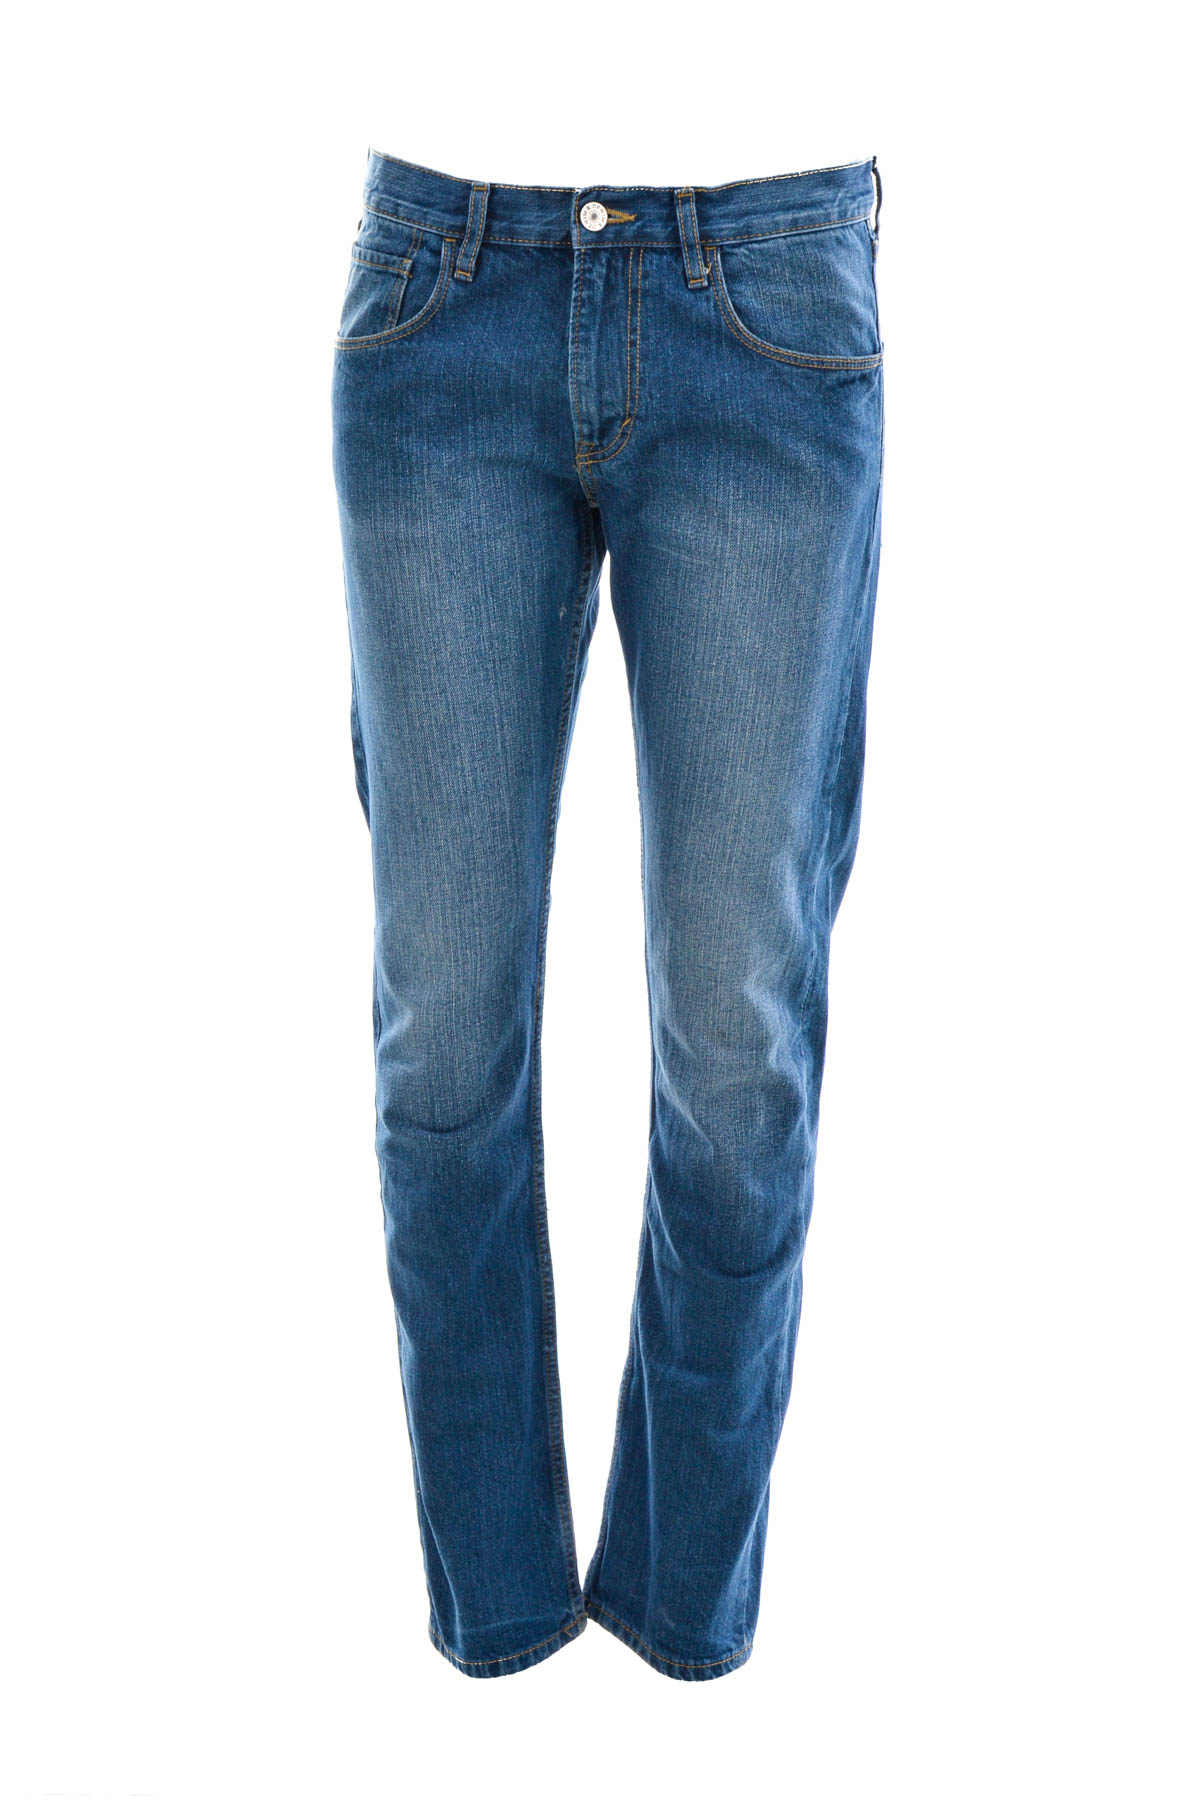 Girl's jeans - H&M - 0